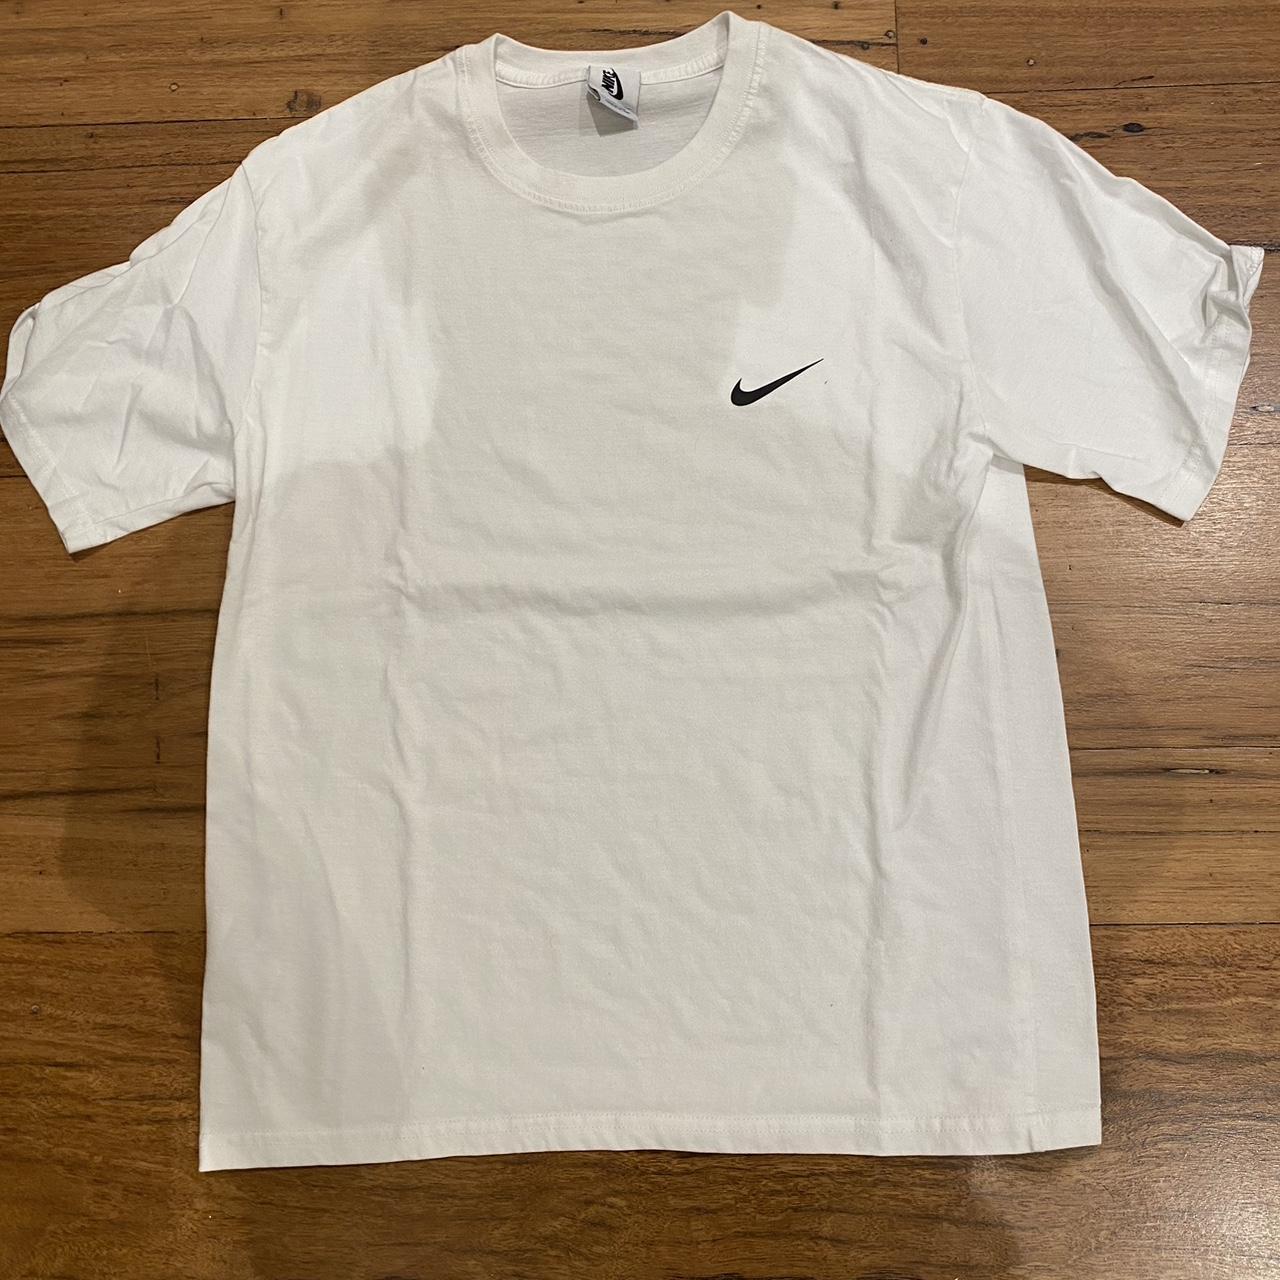 Nike x Stussy T-Shirt Never worn! In great condition... - Depop